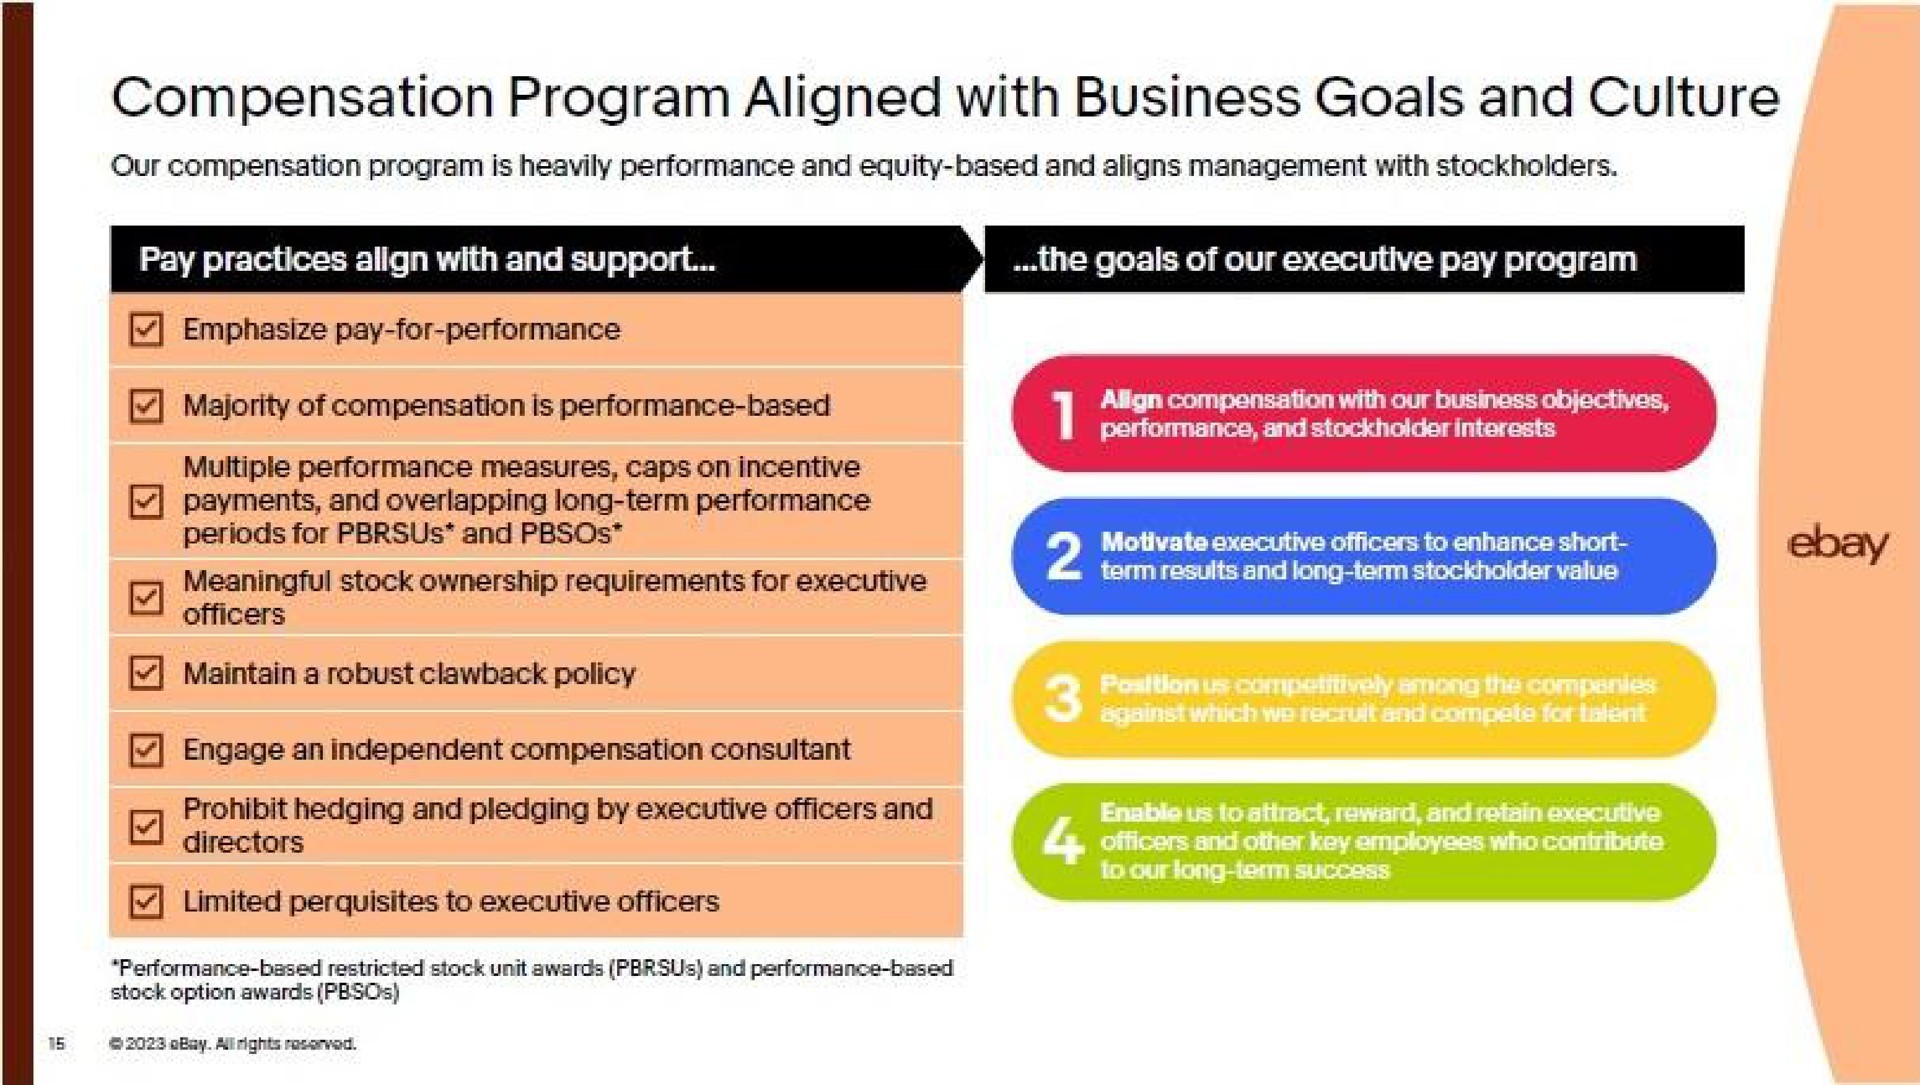 compensation program aligned with business goals and culture | eBay